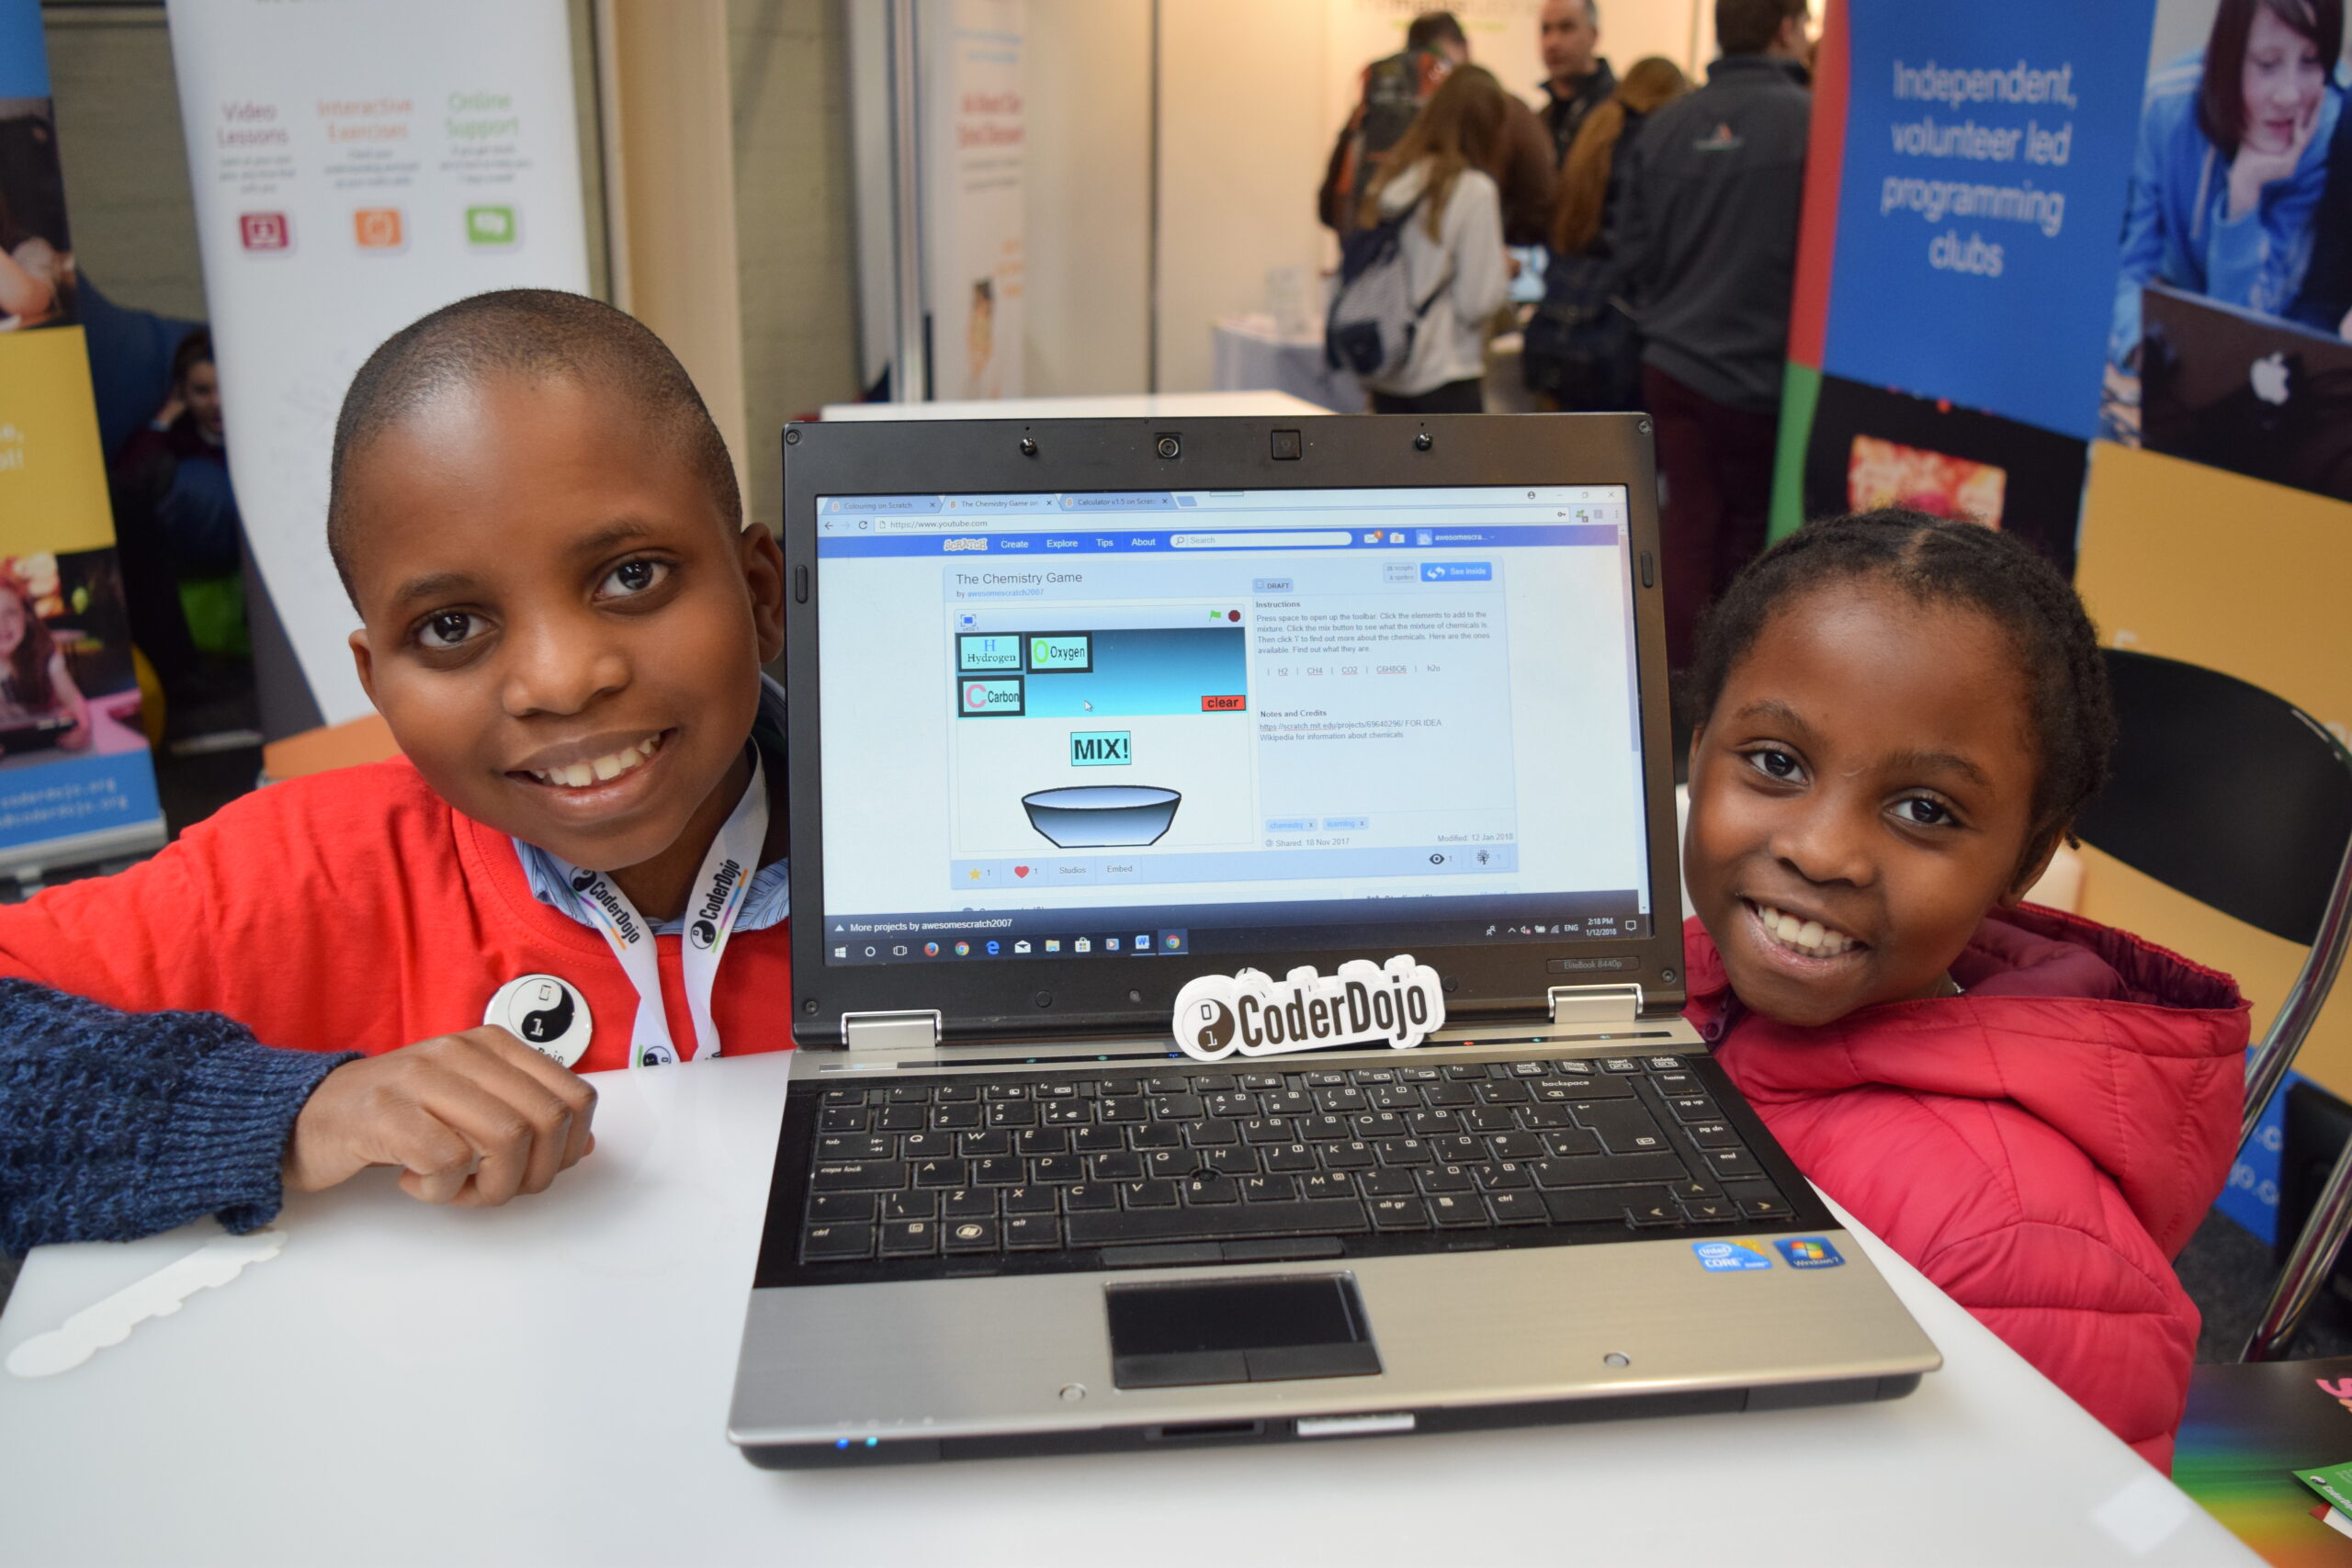 A brother and sister show off their coding project on a laptop.